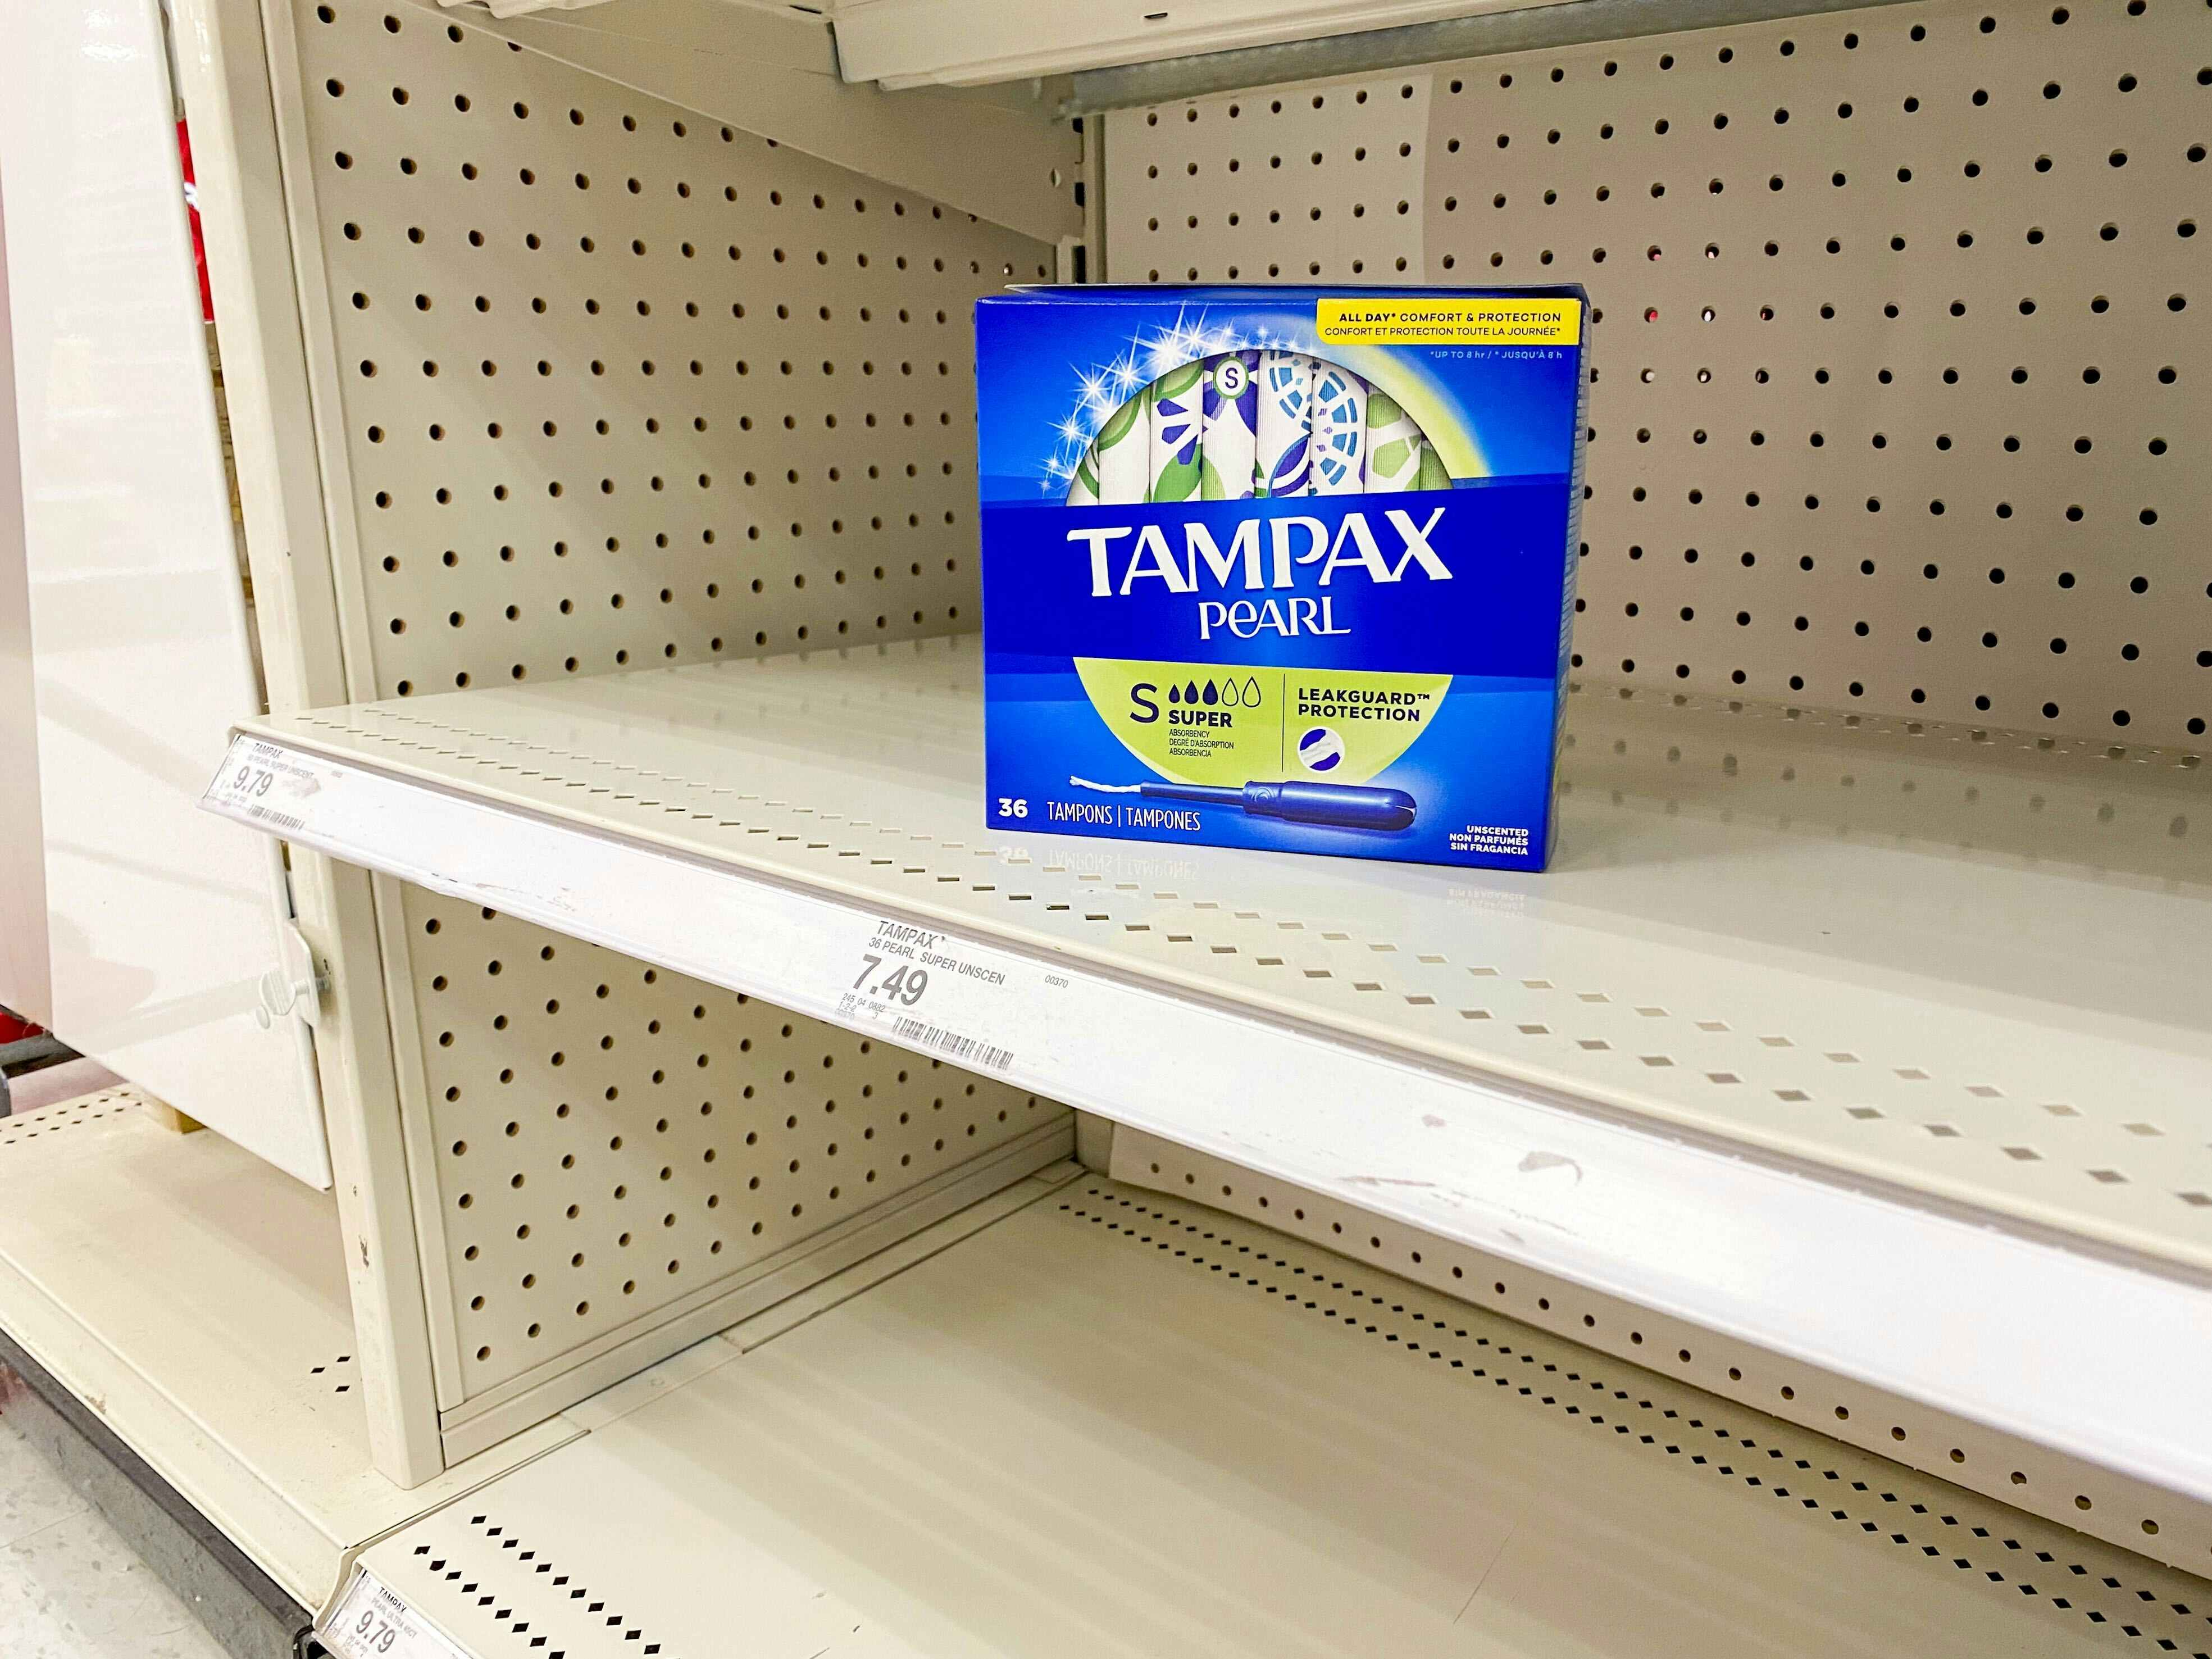 A single box of Tampax tampons sitting on an otherwise empty shelf in the Feminine Products aisle at Target.